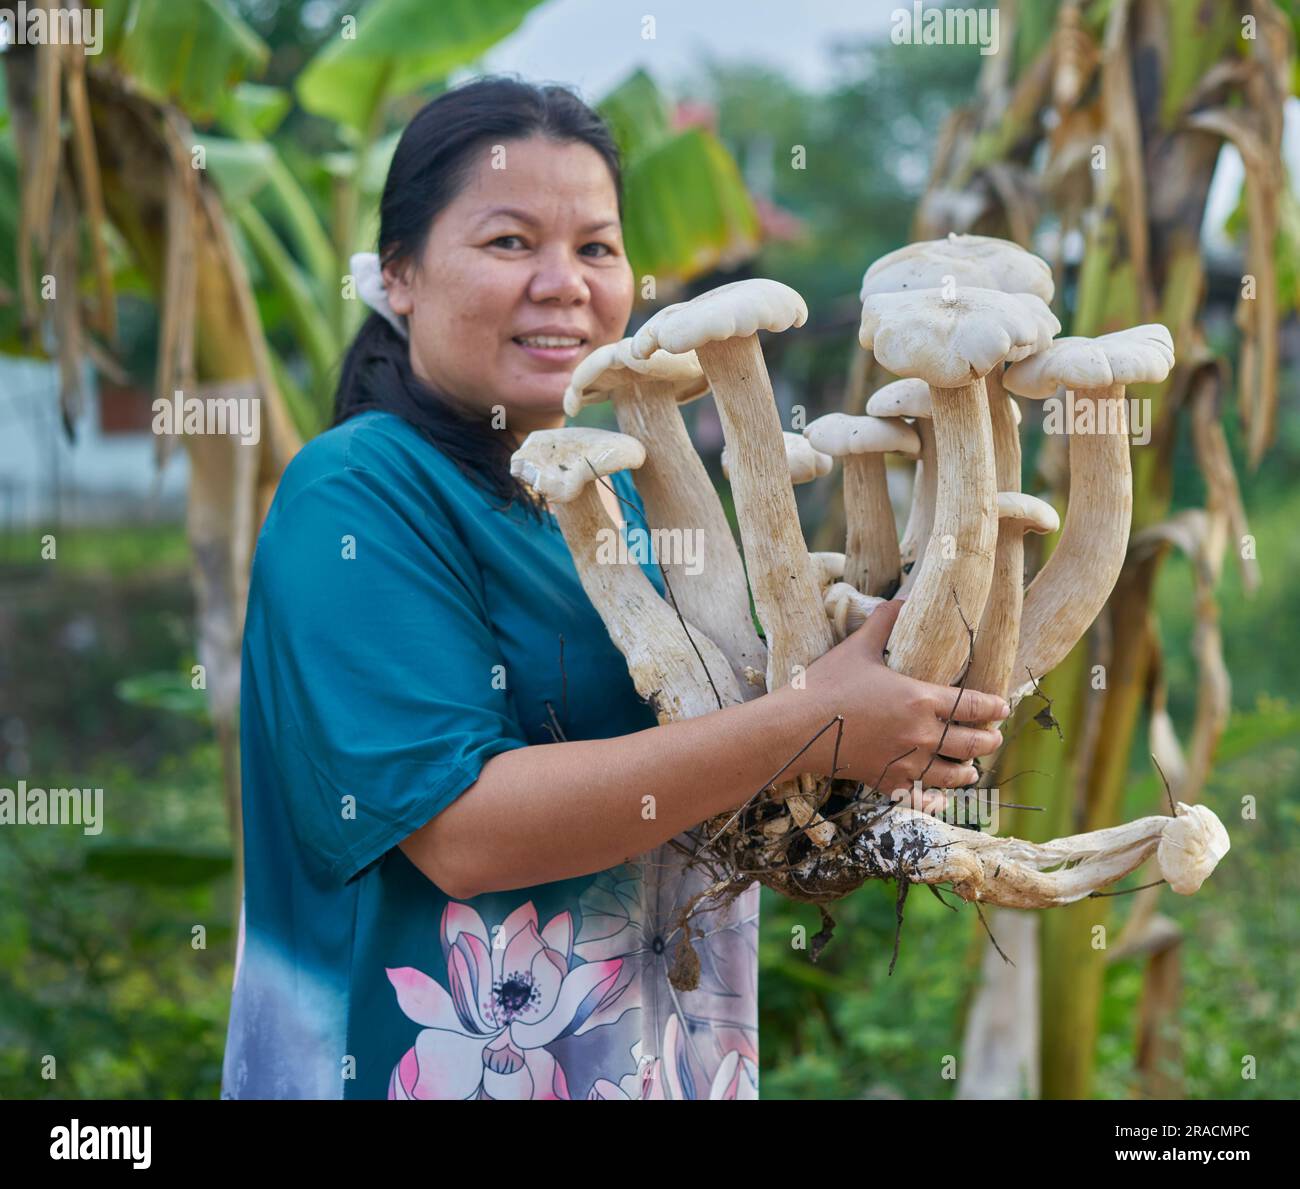 Young Woman Nature Lover Holds Wild Mushrooms Stock Photo - Image of happy,  lifestyle: 153579362